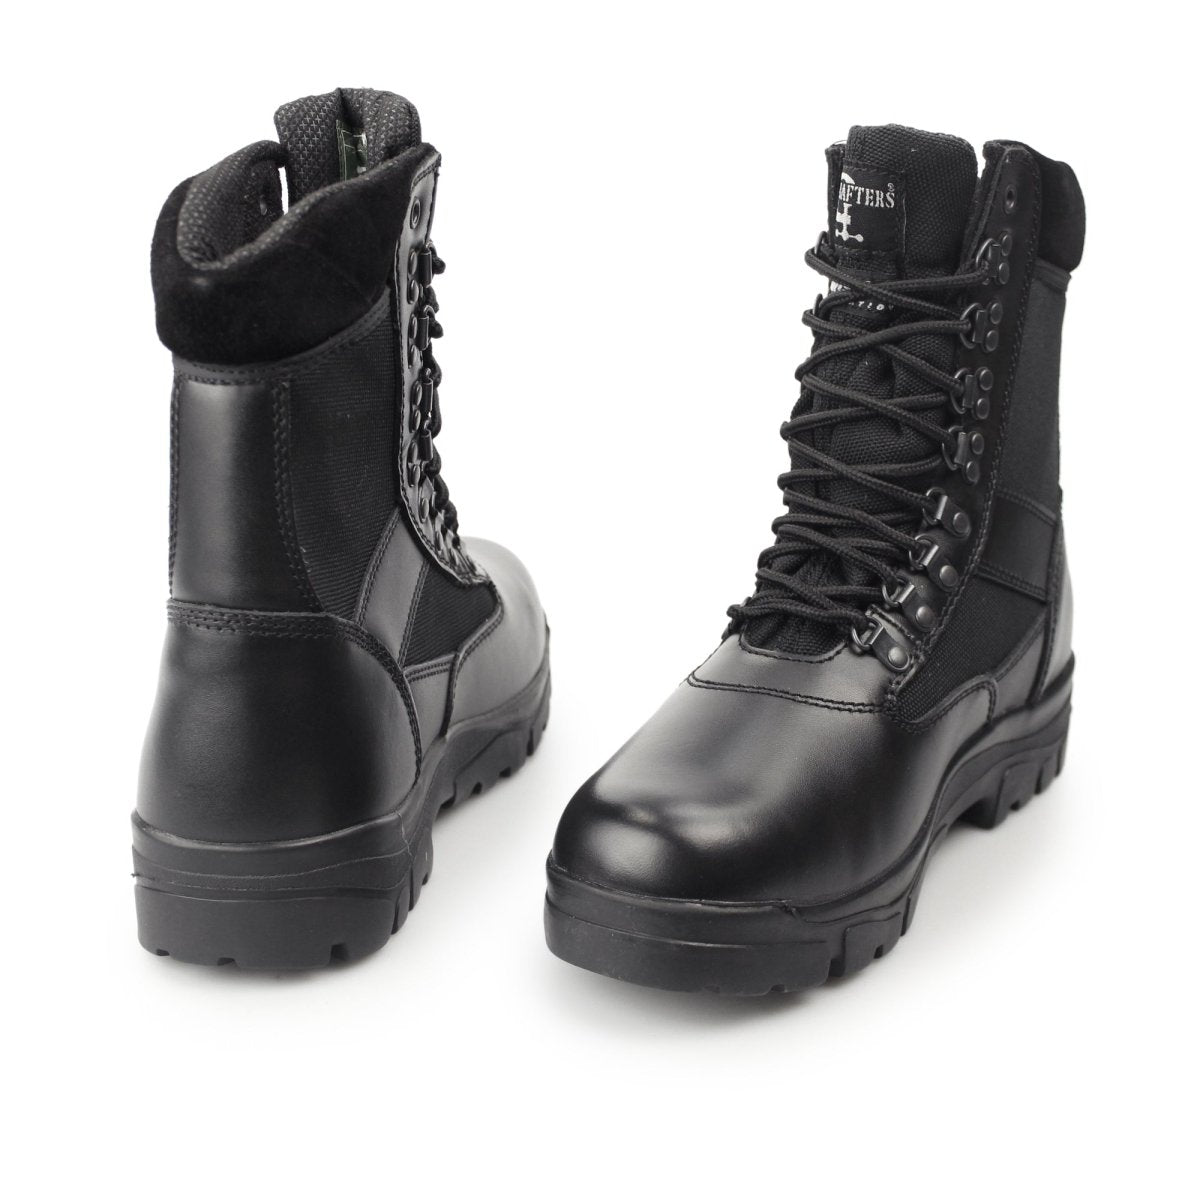 Grafters SNIPER Unisex Leather Work Boots Black M482A - 3 | STB.co.uk